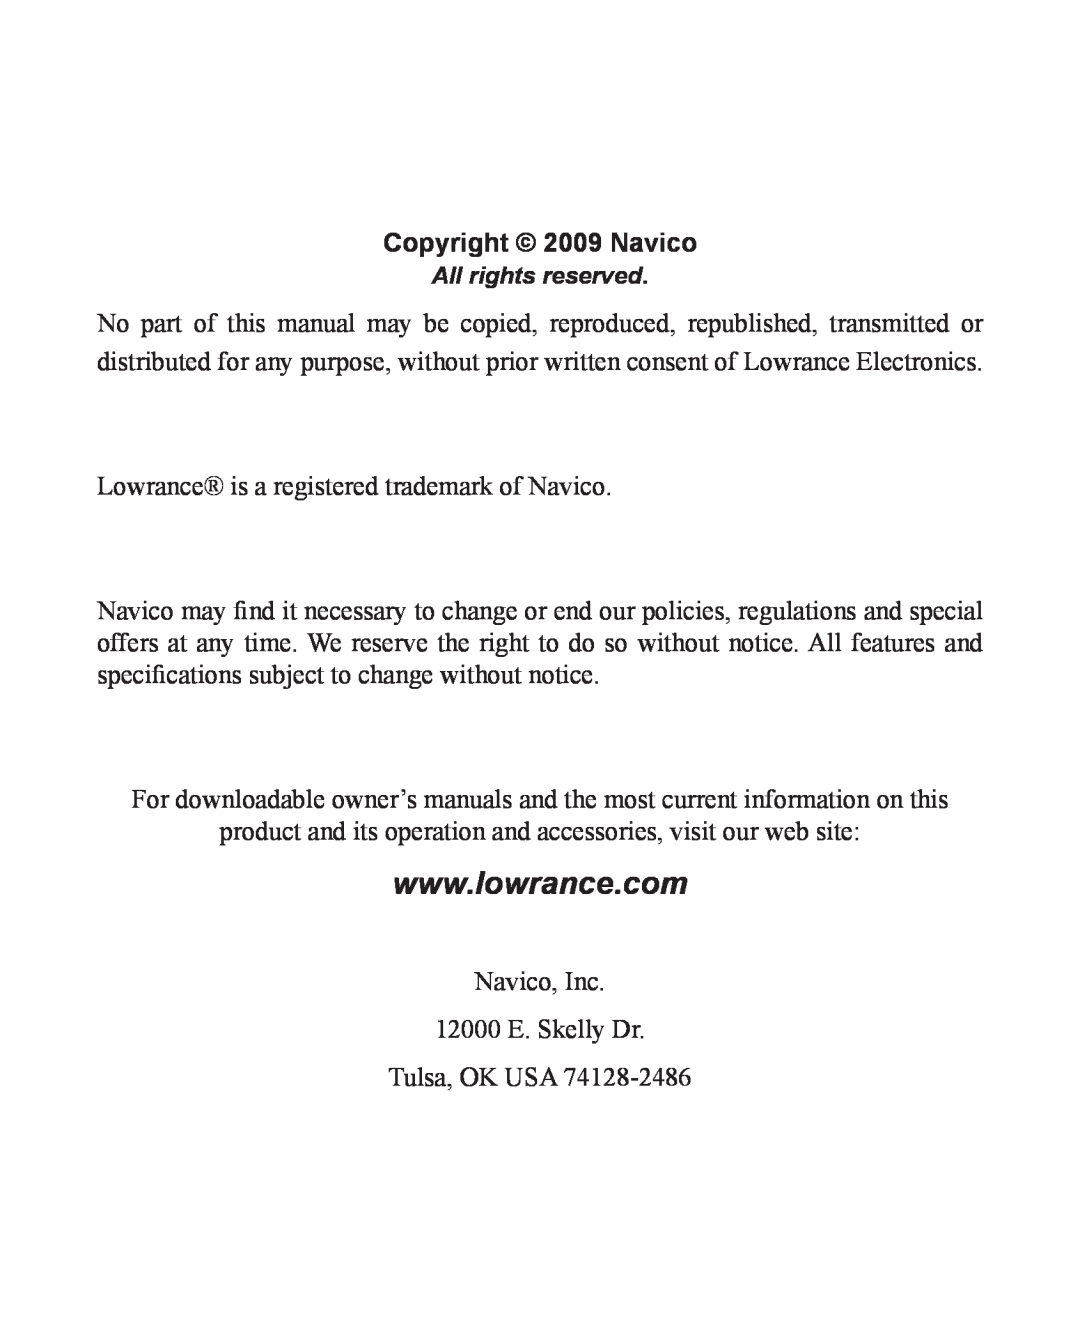 Lowrance electronic LWX-1 installation instructions Copyright 2009 Navico 